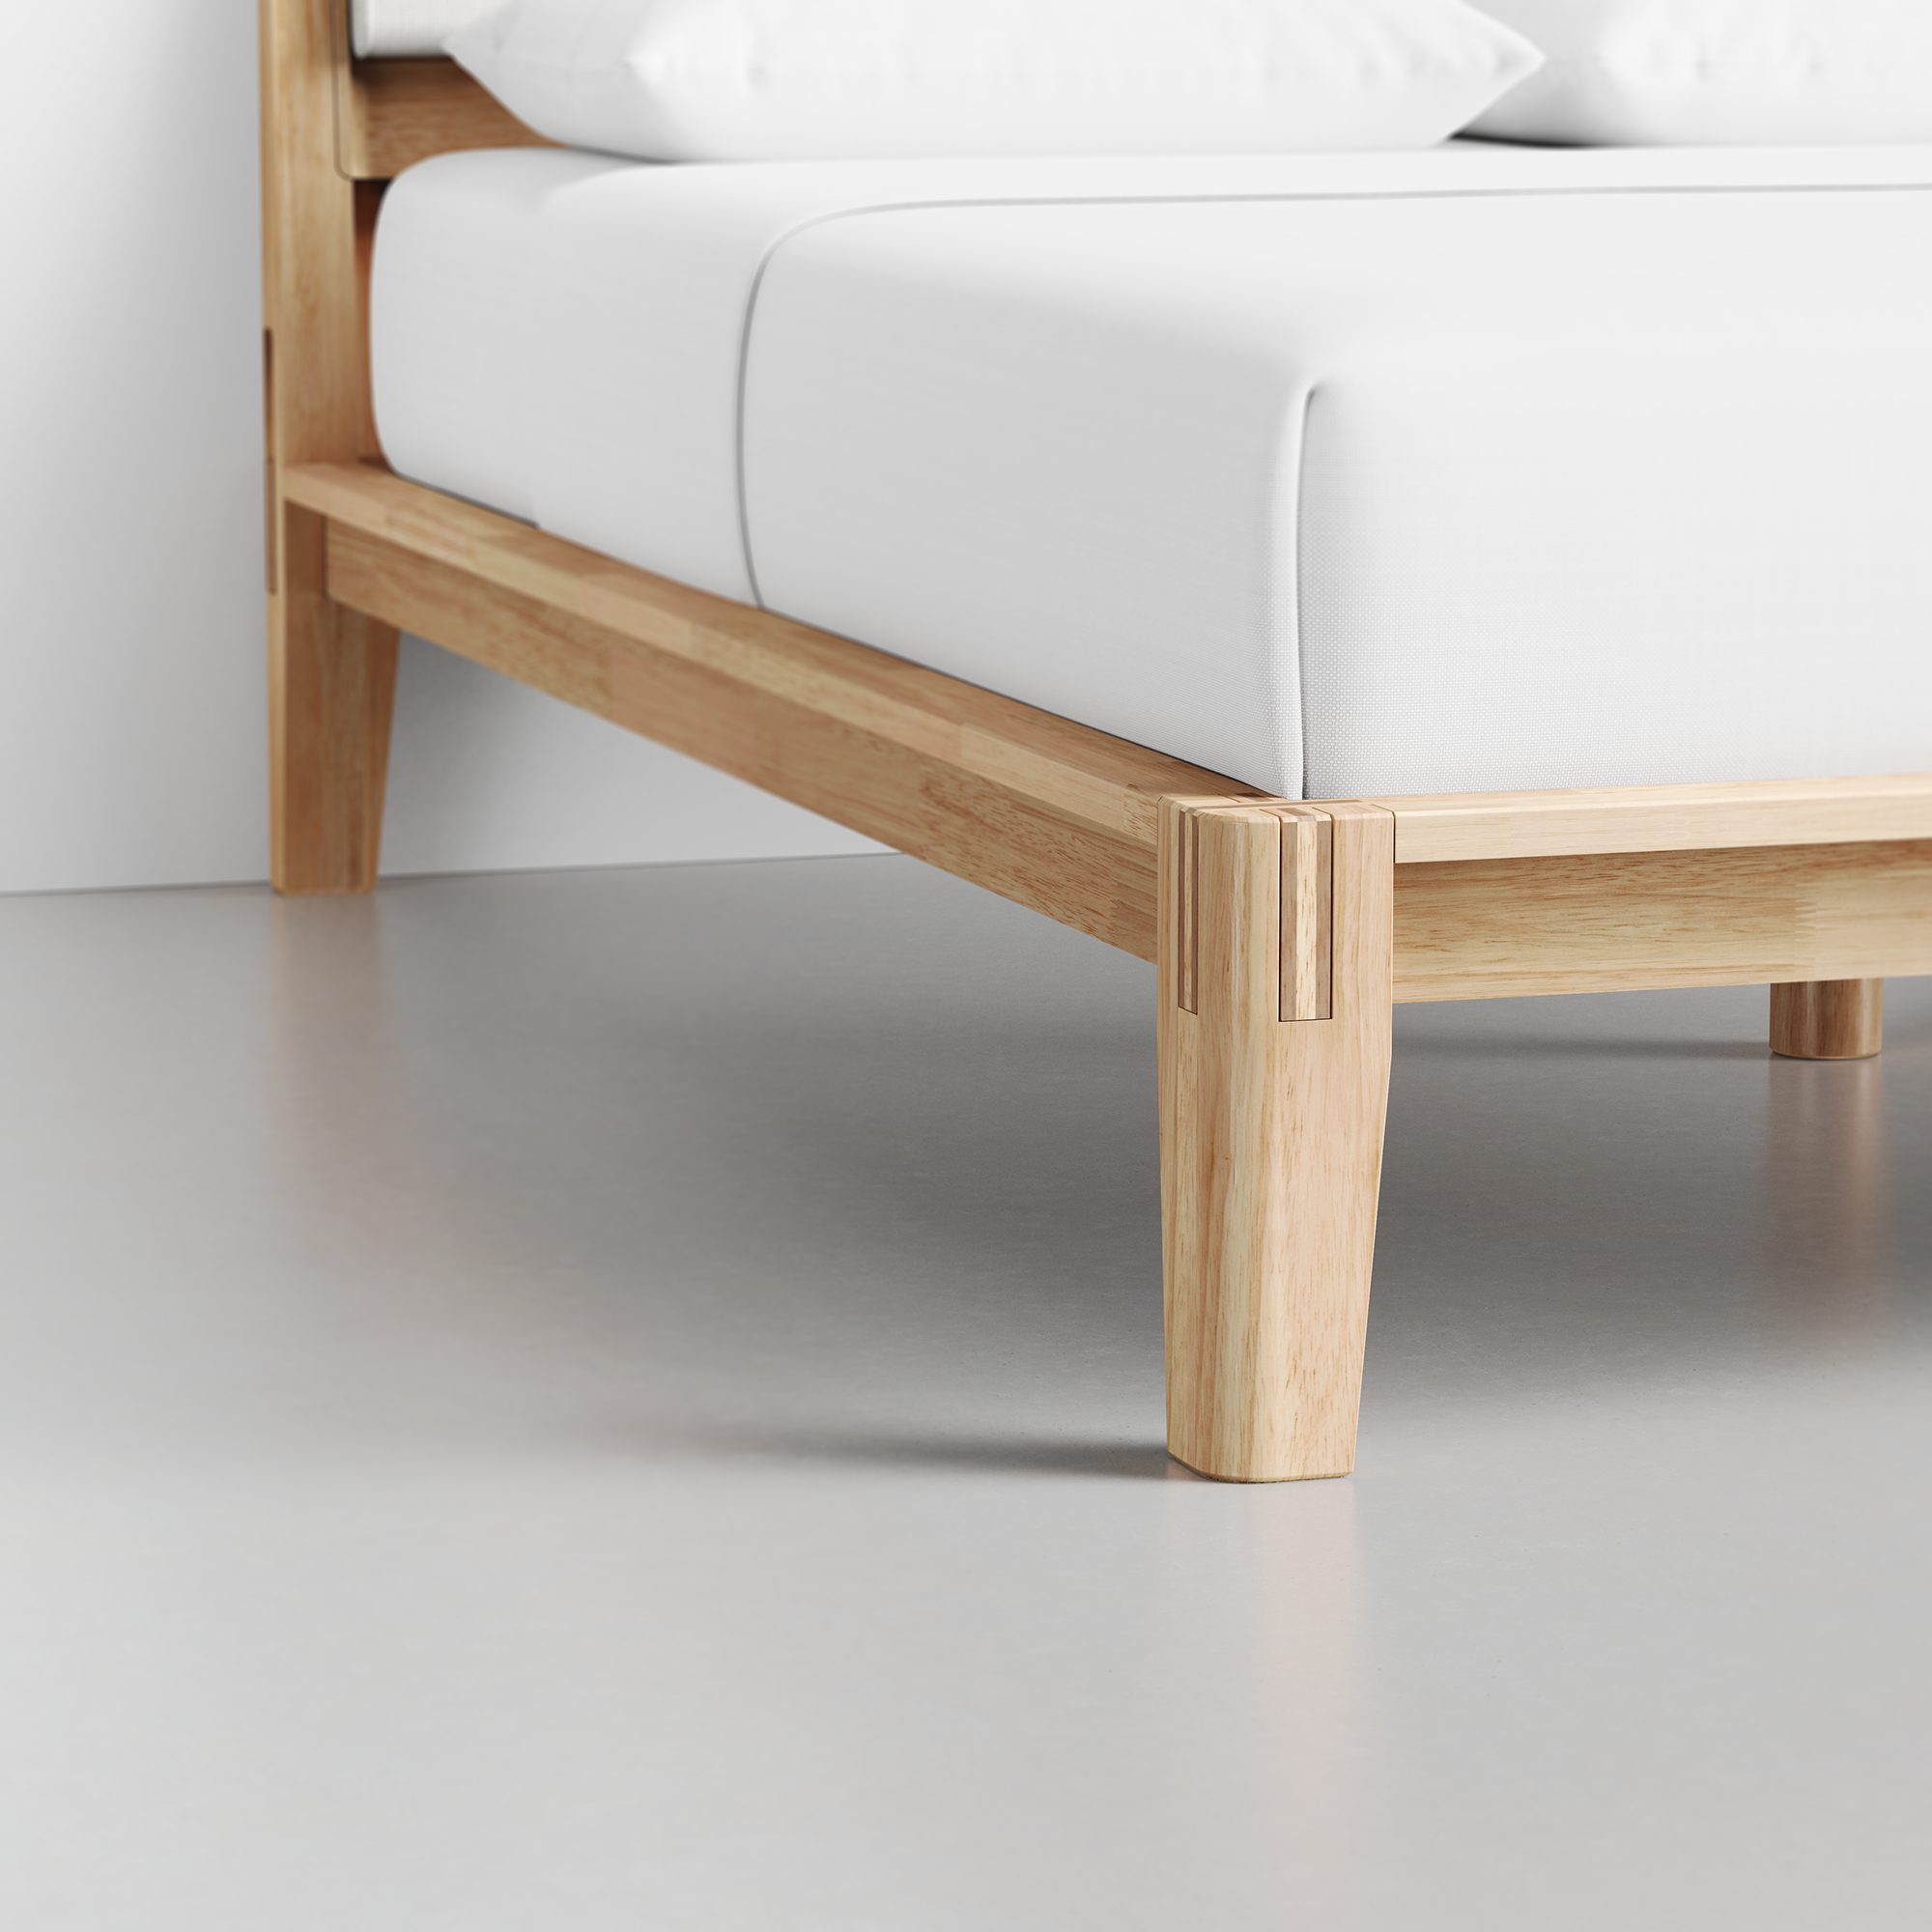 The Bed (Natural / HB Cushion Light Linen) - Render - Foot Detail